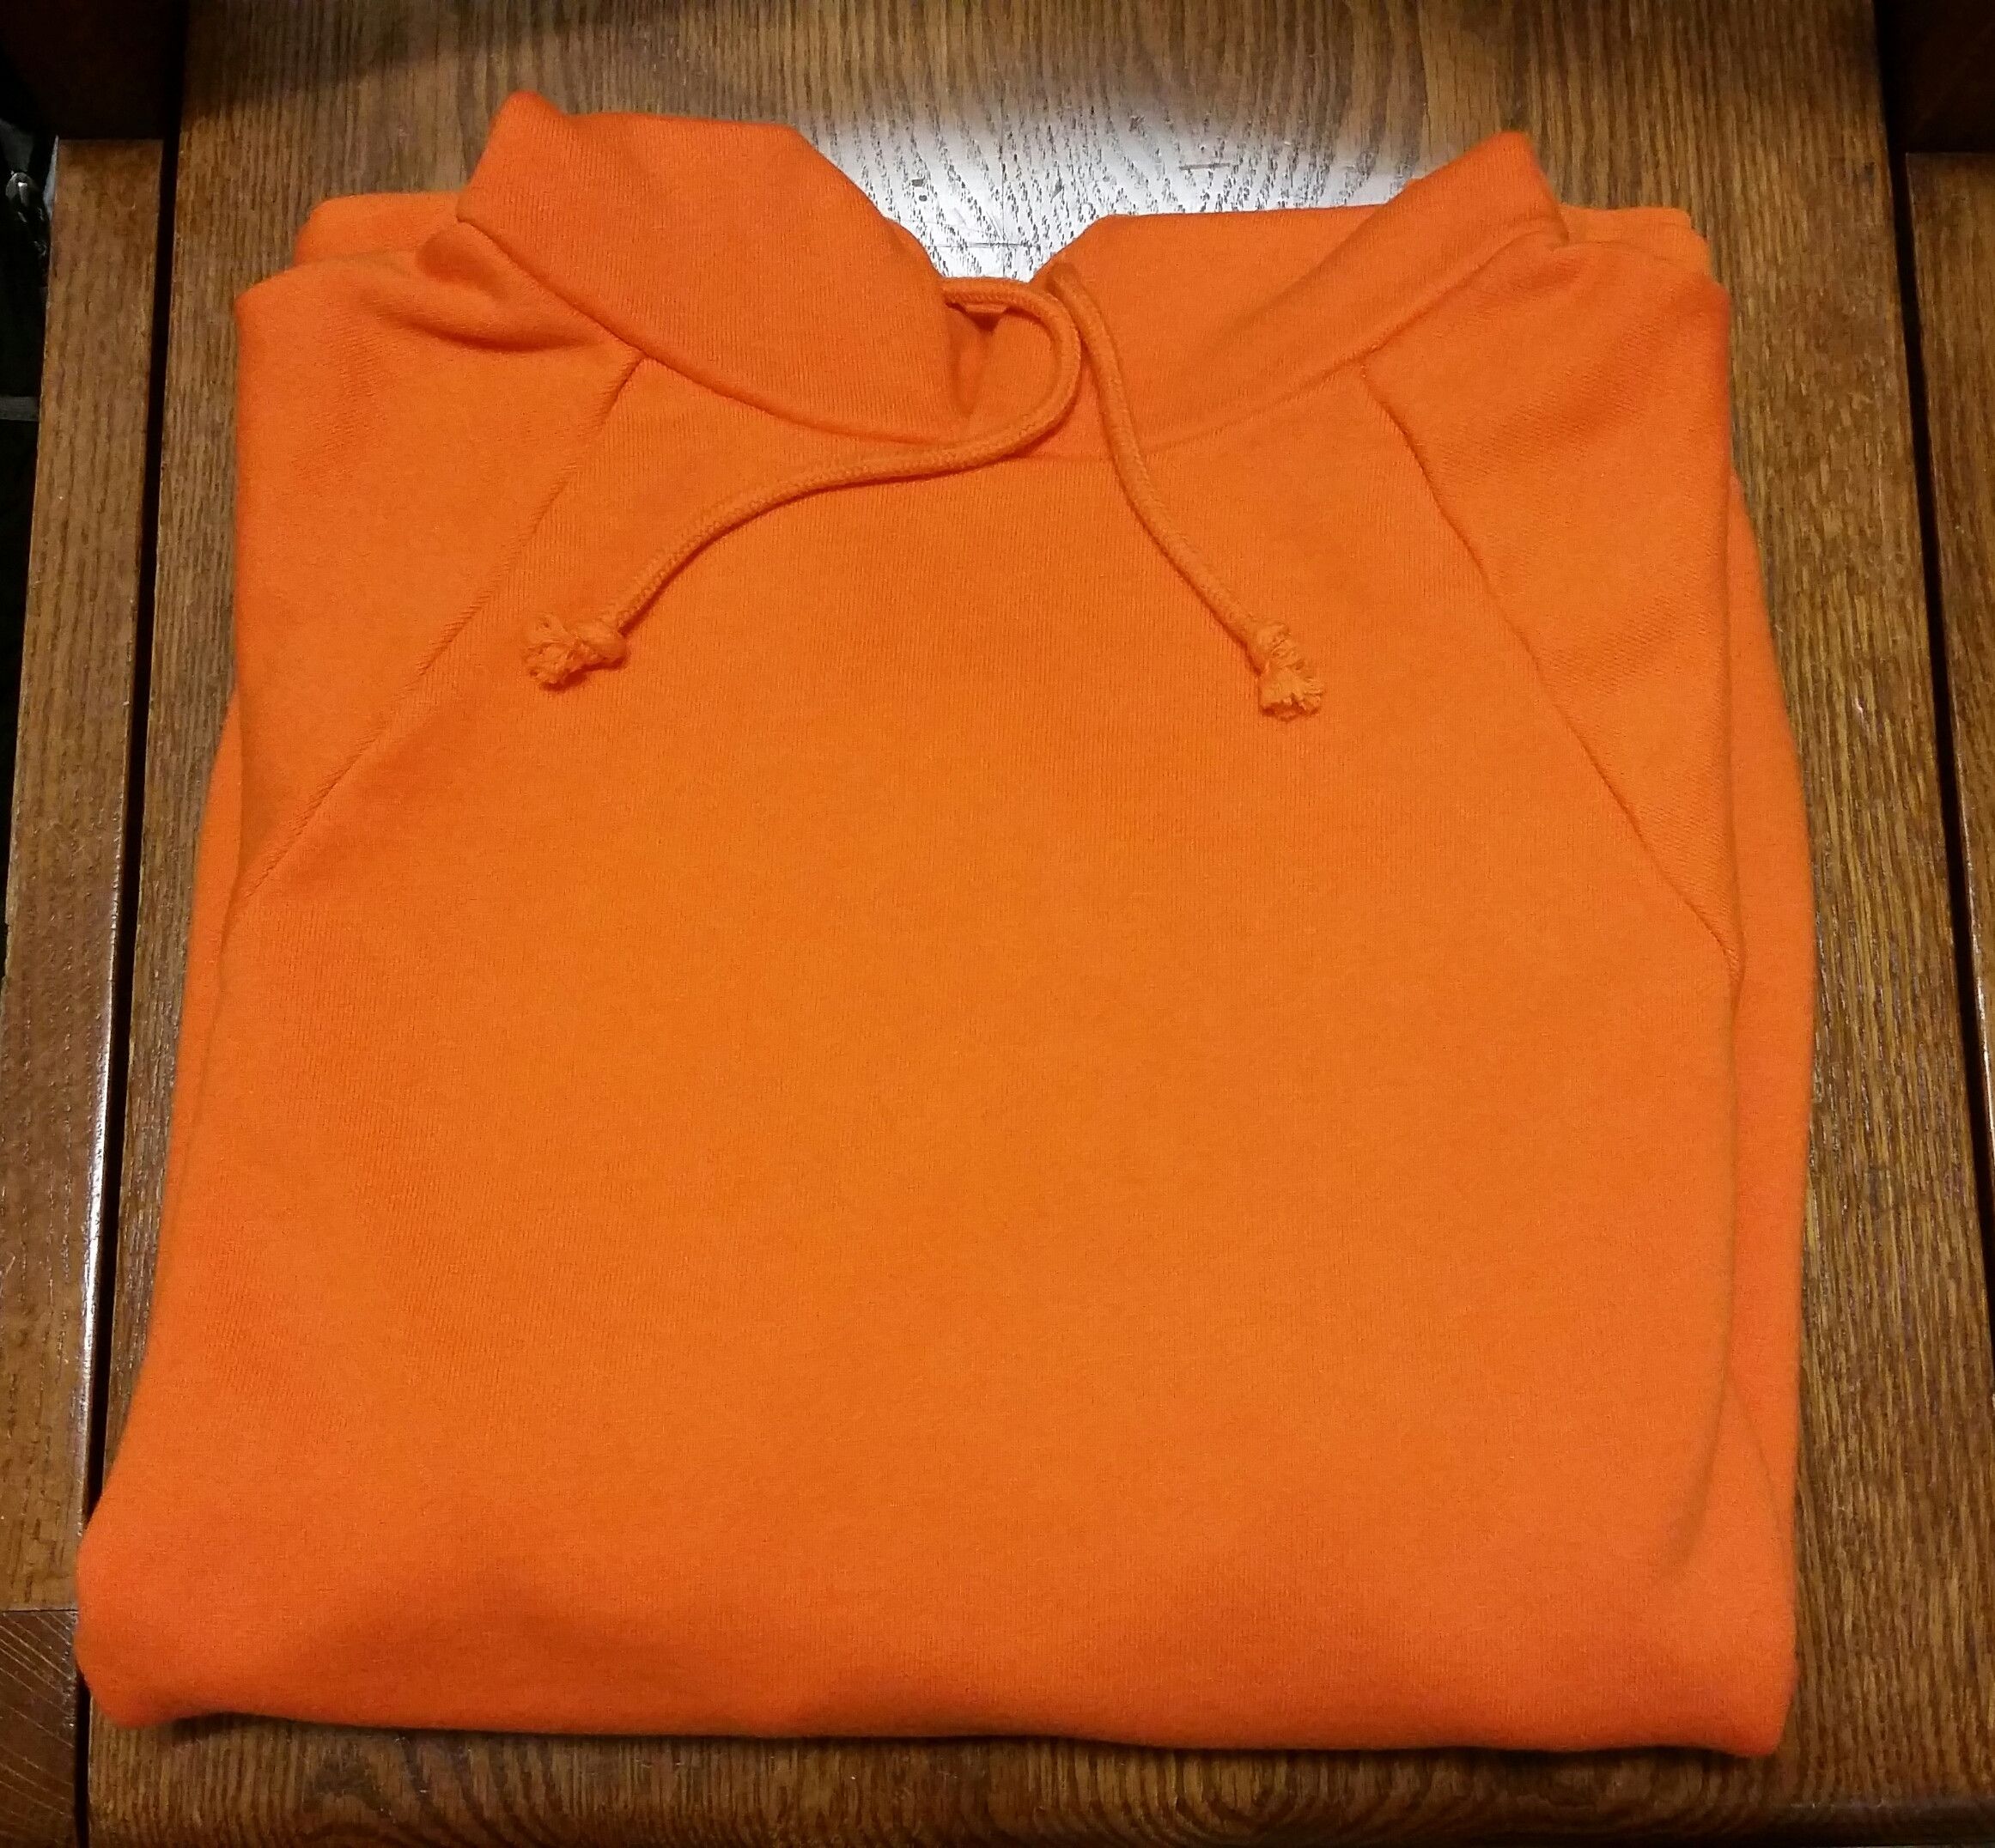 Pacsun Collection 2 Orange Hoodie Size US S / EU 44-46 / 1 - 1 Preview